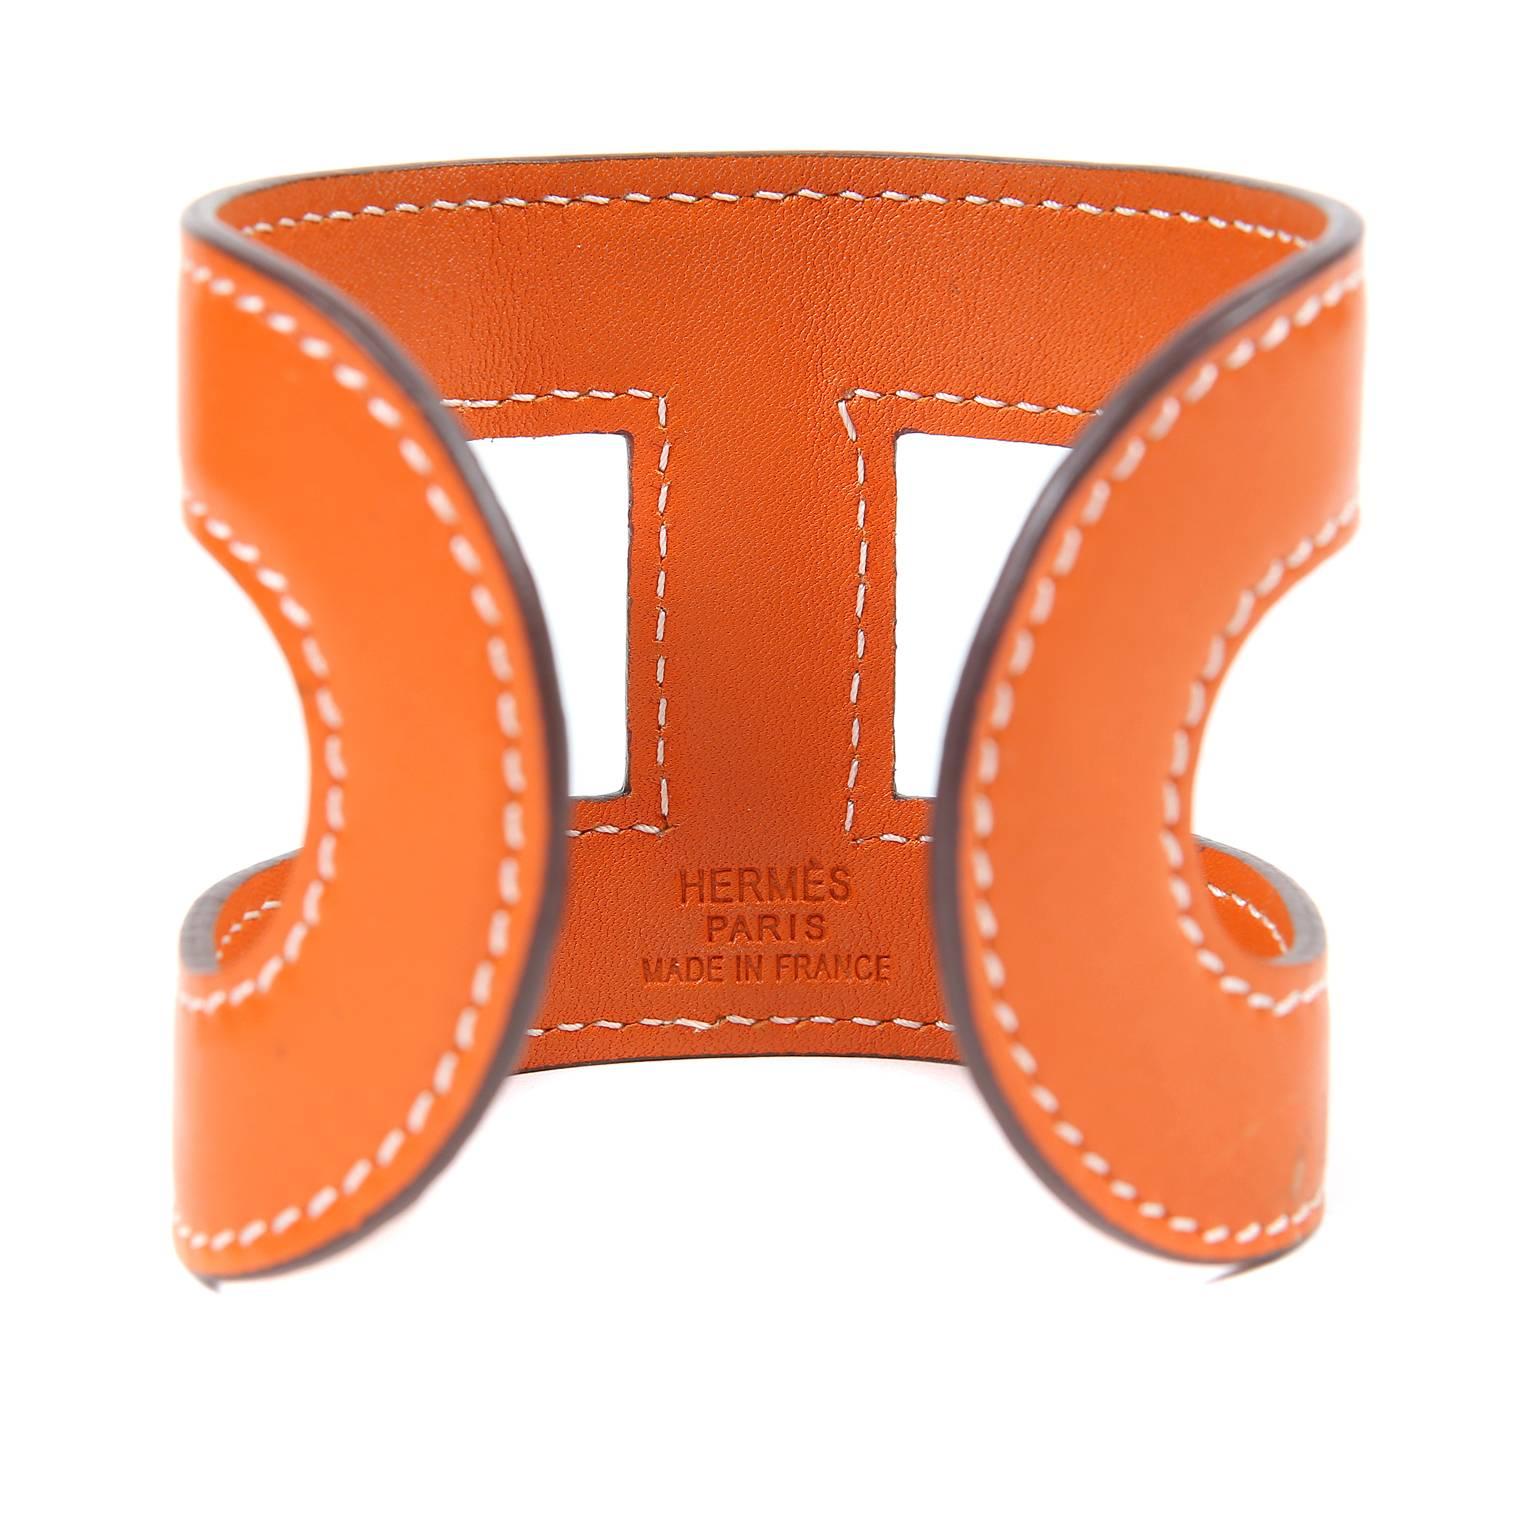 Hermès Orange Leather H Cuff is in excellent condition.  Wide leather bangle style has contrasting white stitching.  Cut out design creates the iconic “H” of Hermès.  Made in France.
A100